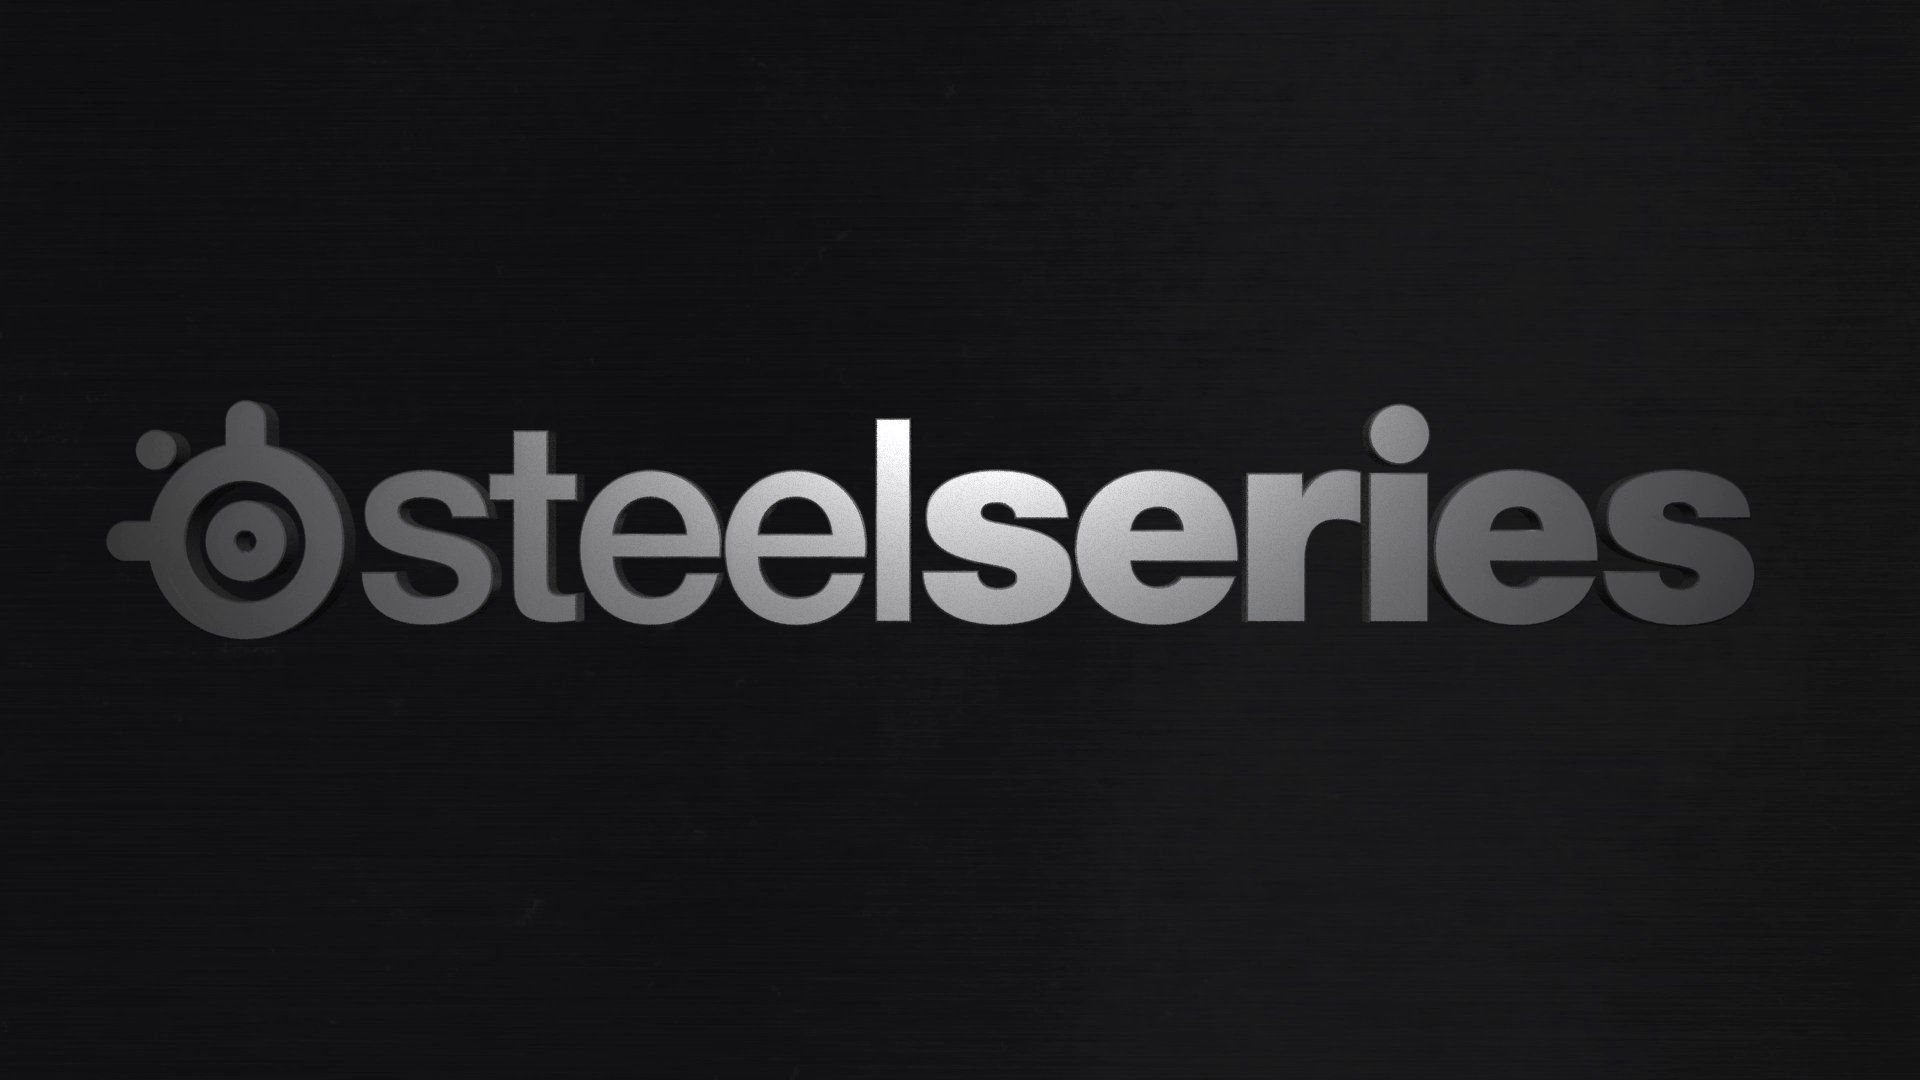 STEELSERIES Gaming computer f wallpaper 1920x1080 401460